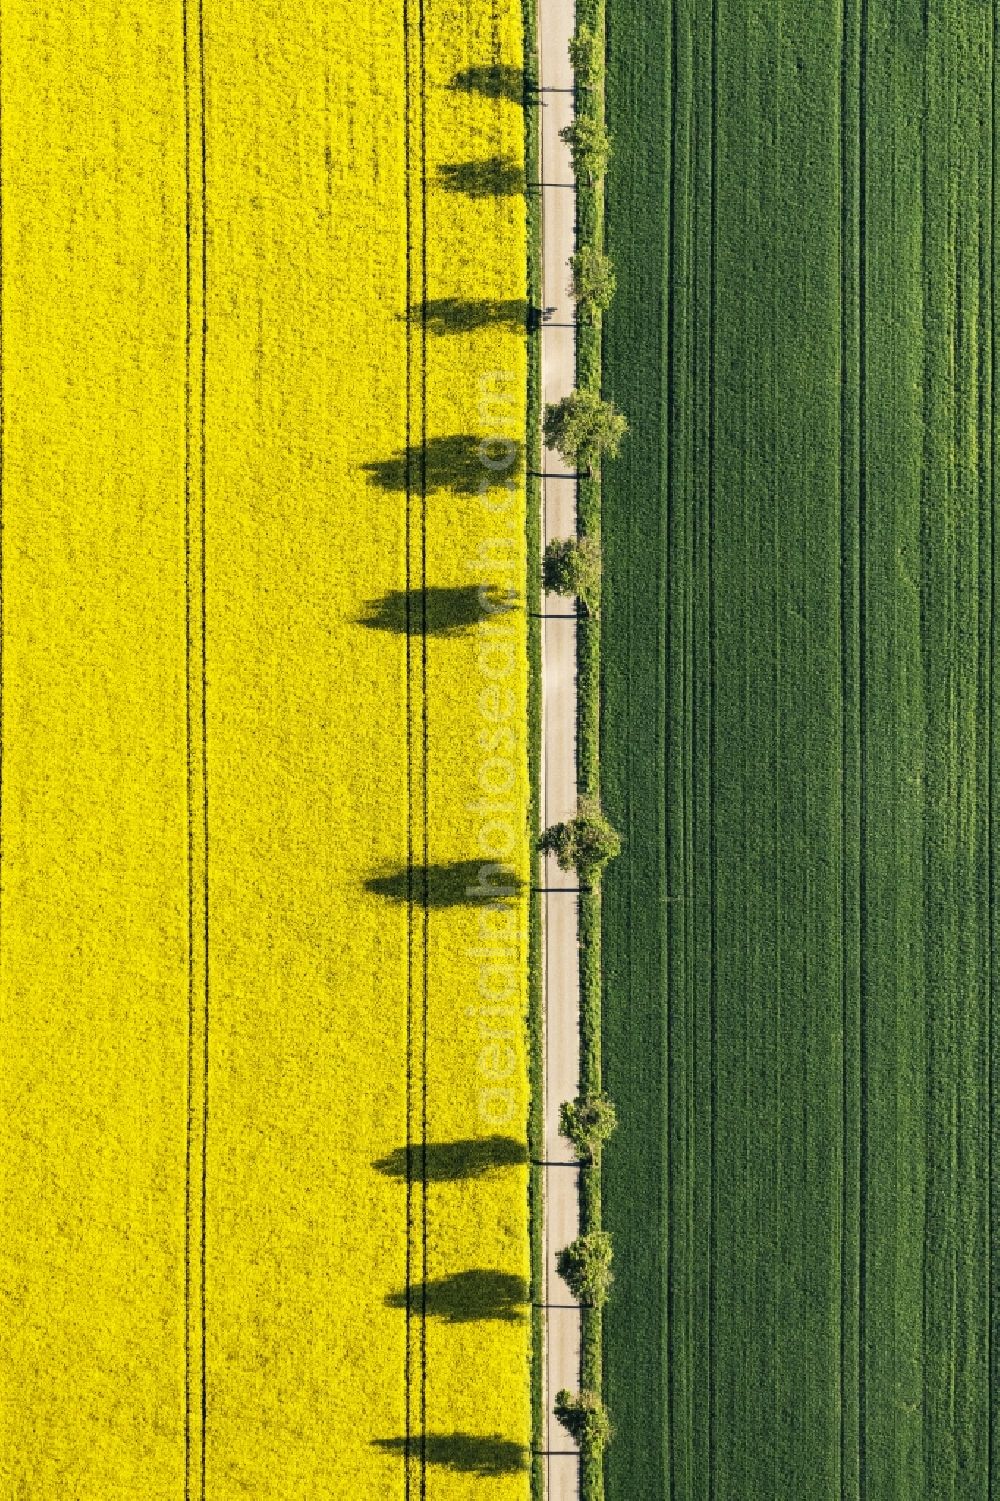 Vertical aerial photograph Monheim - Vertical aerial view from the satellite perspective of the tree with shadow forming by light irradiation on a field in Monheim in the state Bavaria, Germany